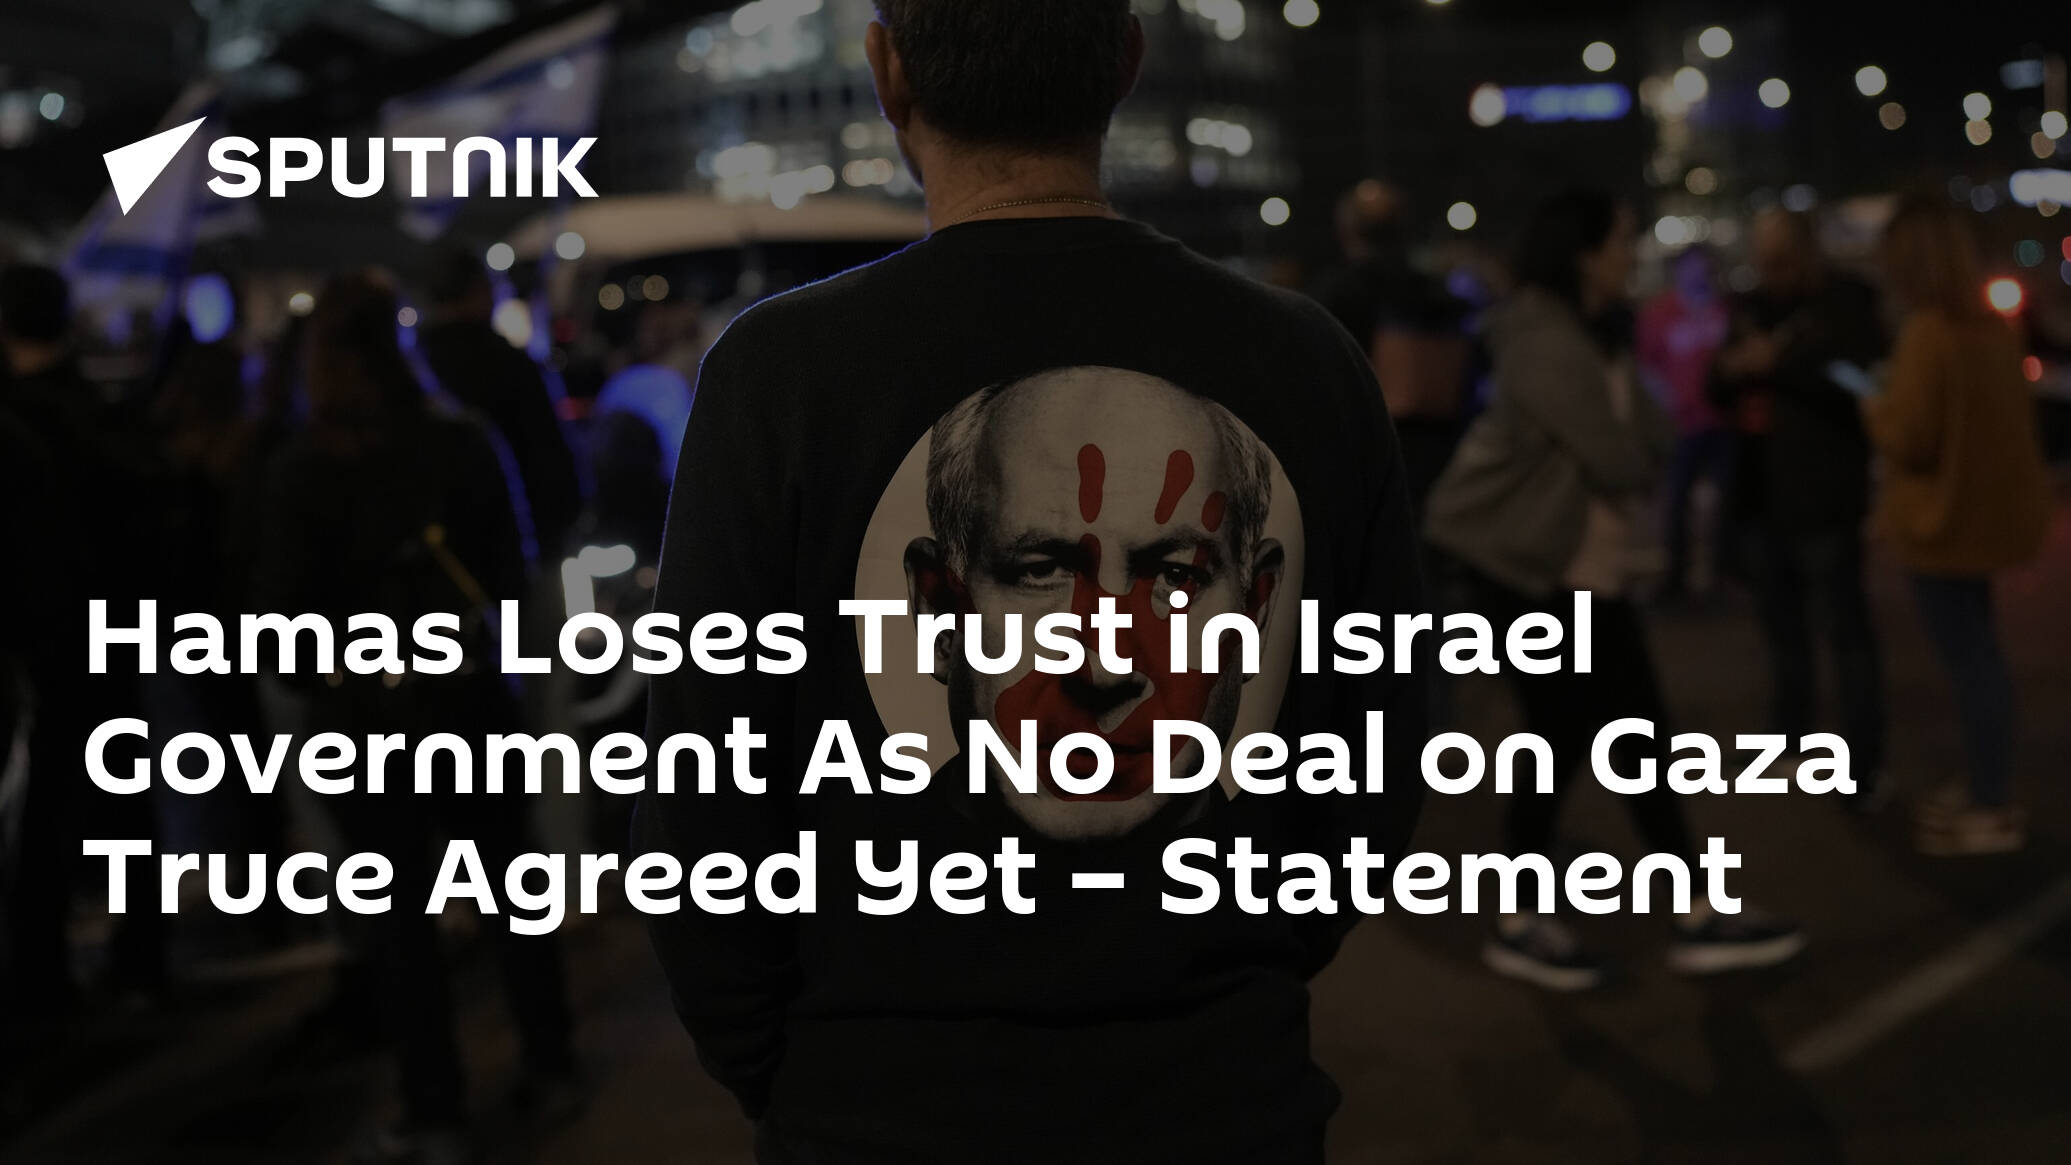 Hamas Loses Trust in Israel Government As No Deal on Gaza Truce Agreed Yet – Statement